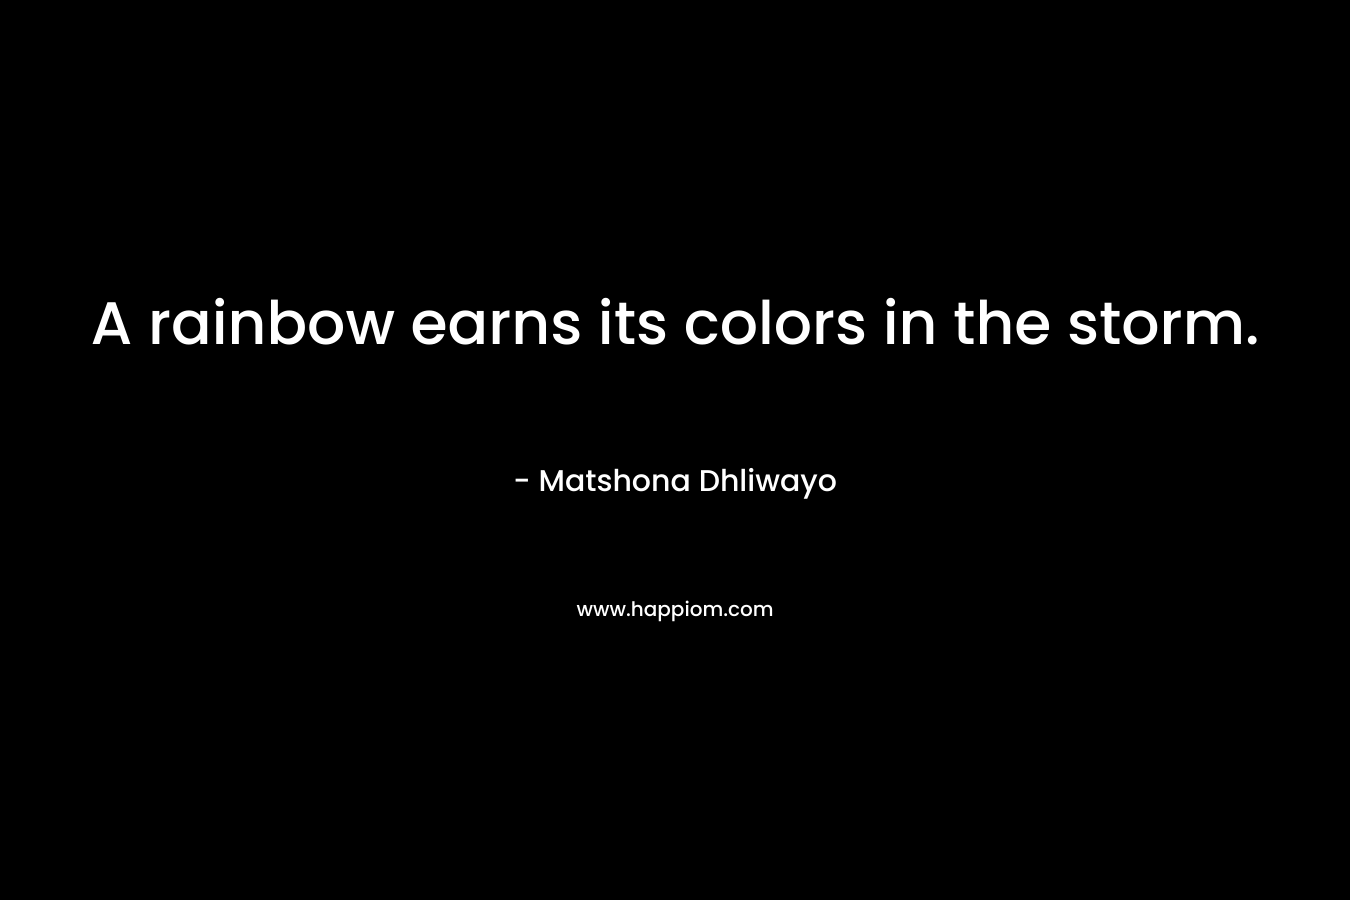 A rainbow earns its colors in the storm. – Matshona Dhliwayo